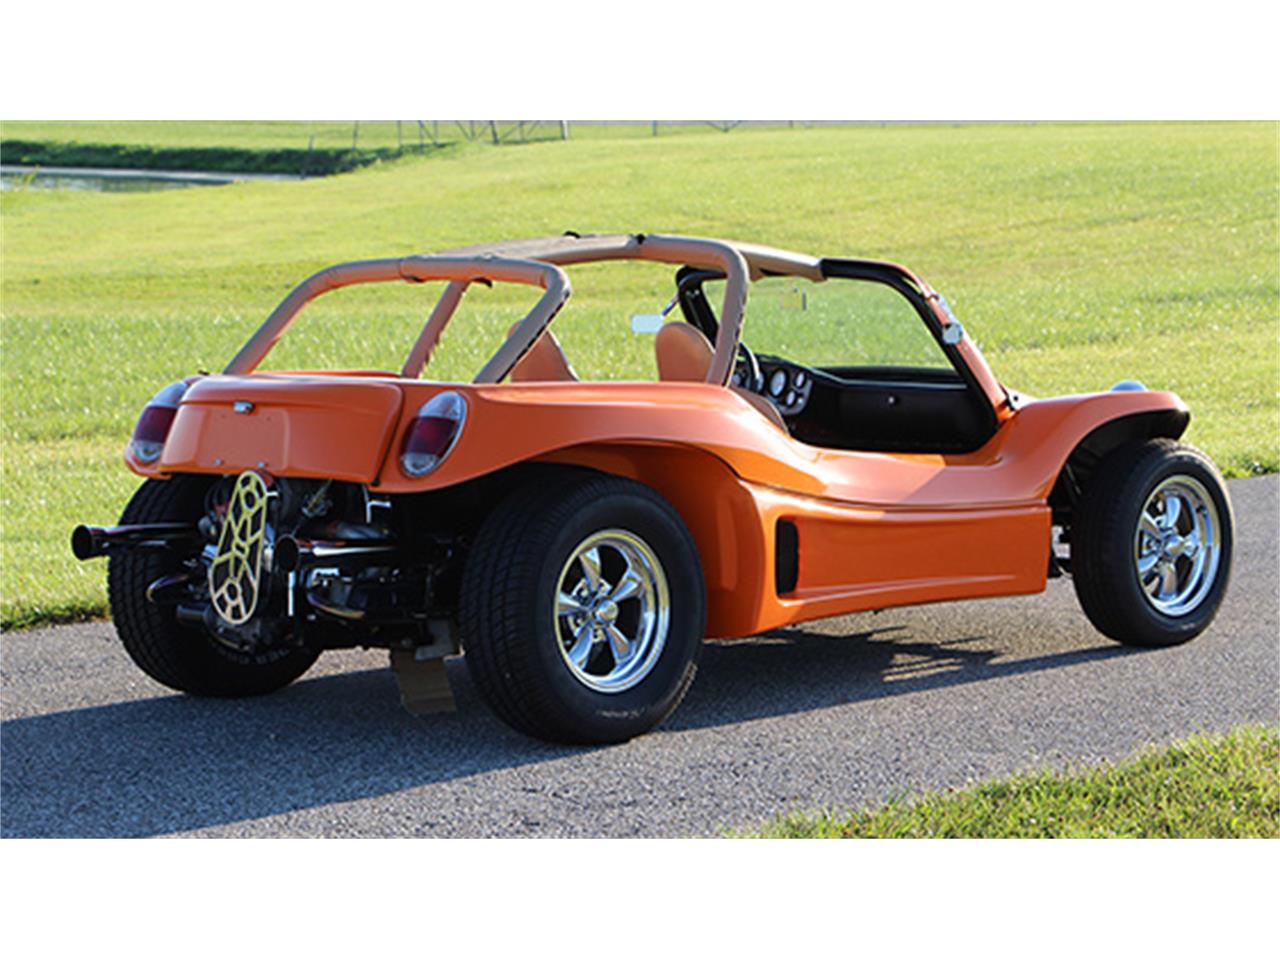 2008 Meyers Manx (Dune Buggy) for Sale | ClassicCars.com ...